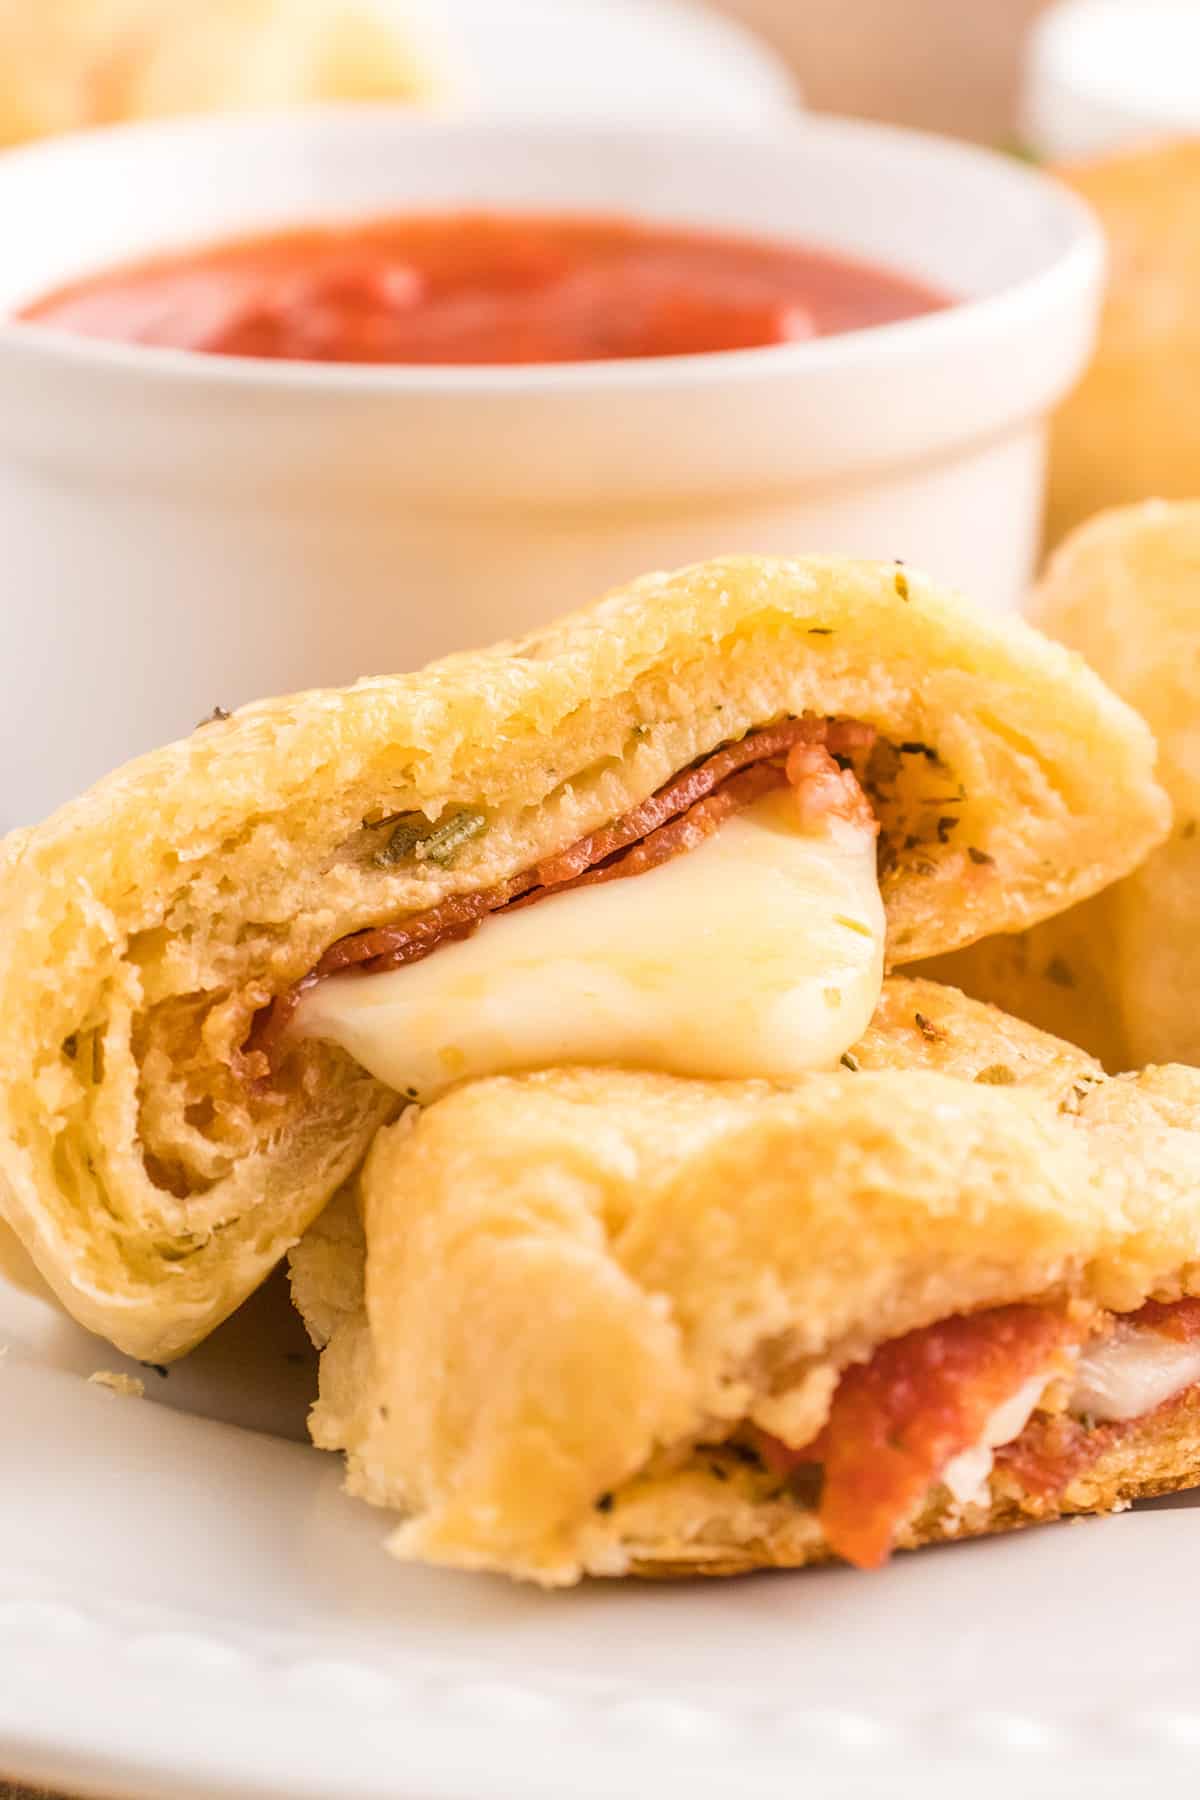 Pizza roll showing melty cheese running out.